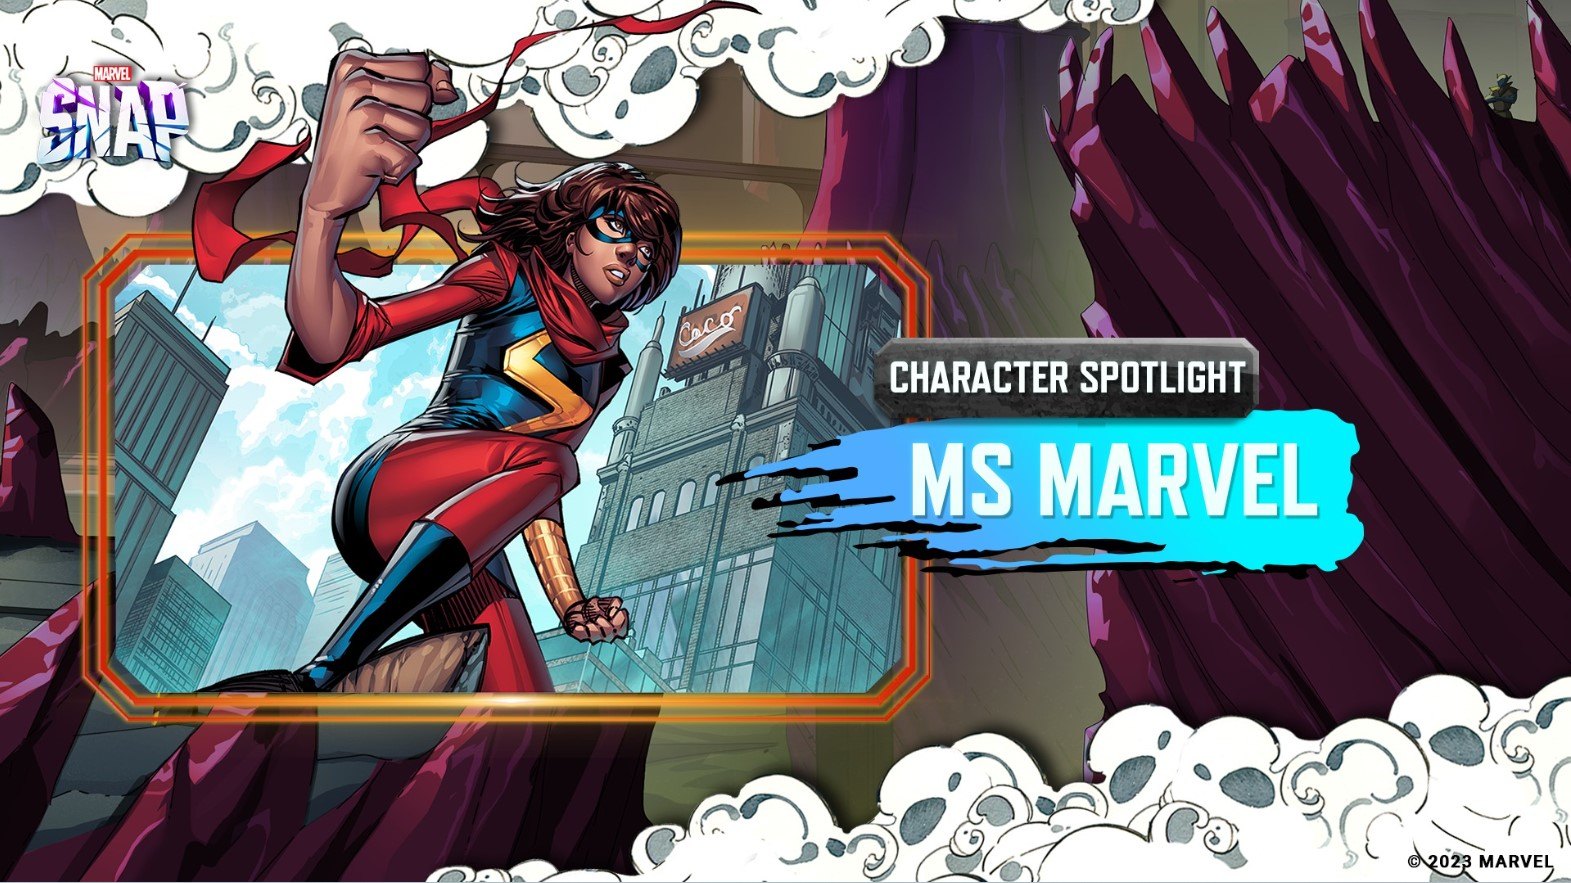 MARVEL SNAP Higher, Further, Faster Update: New Locations, Characters, and More